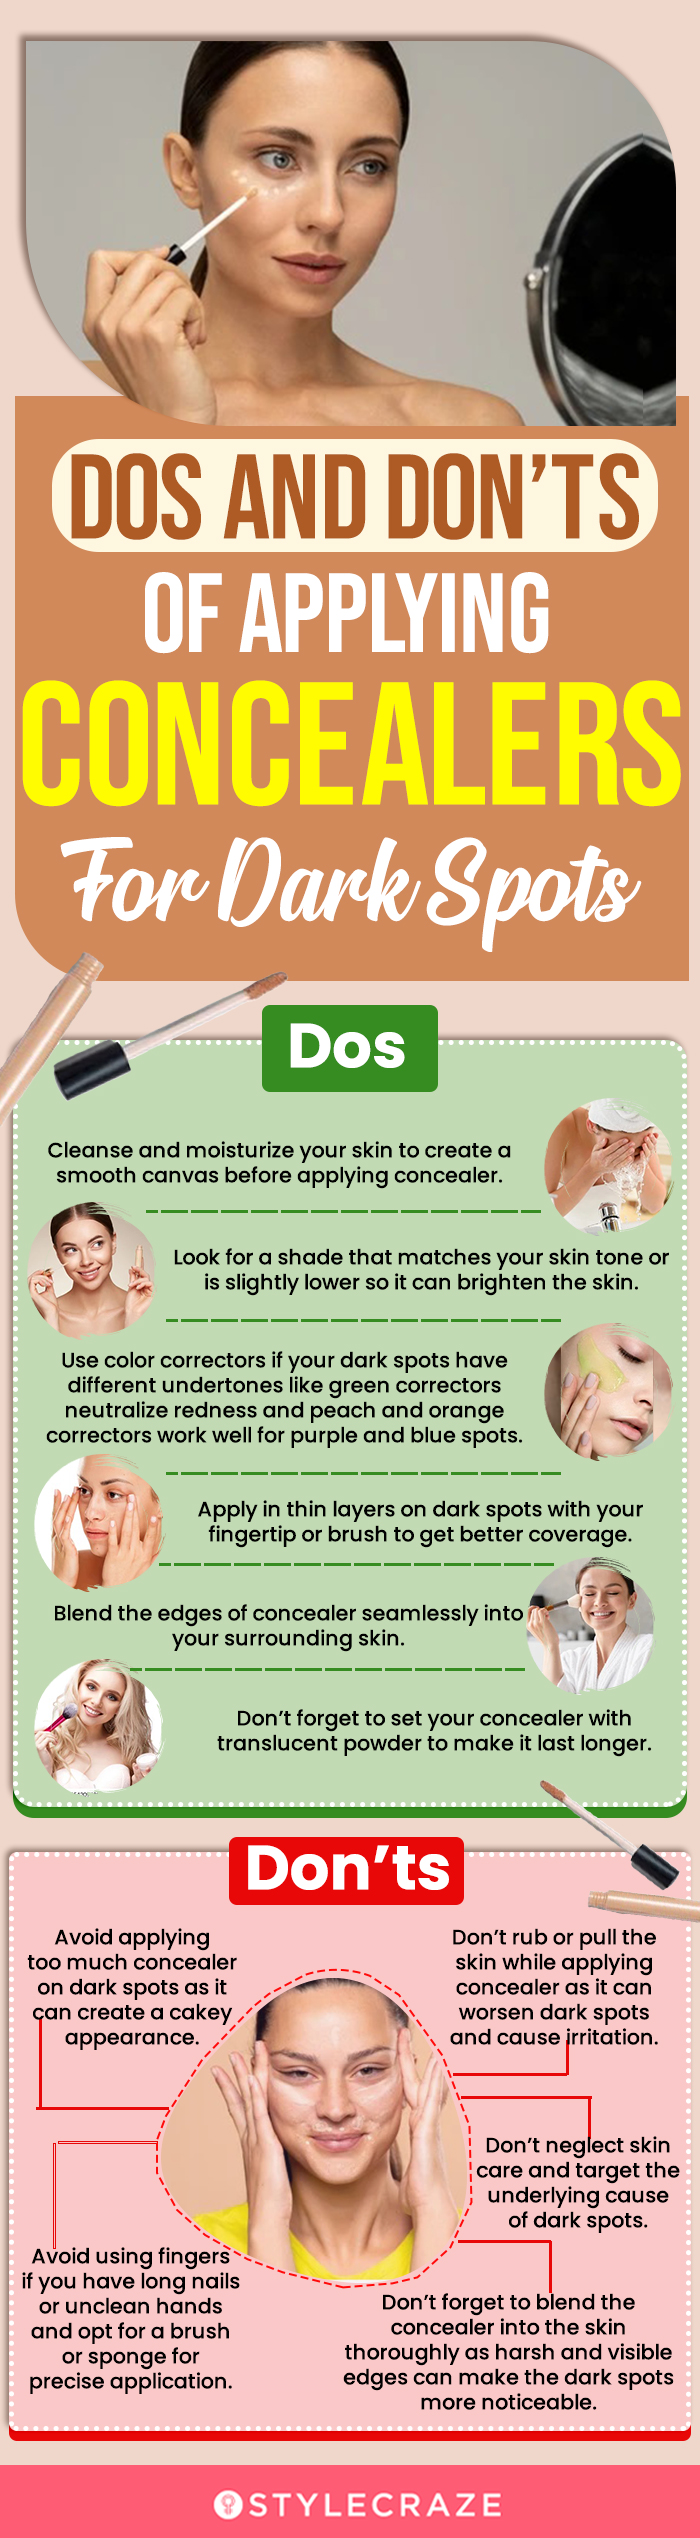 Dos And Don’ts Of Applying Concealer For Dark Spots (infographic)